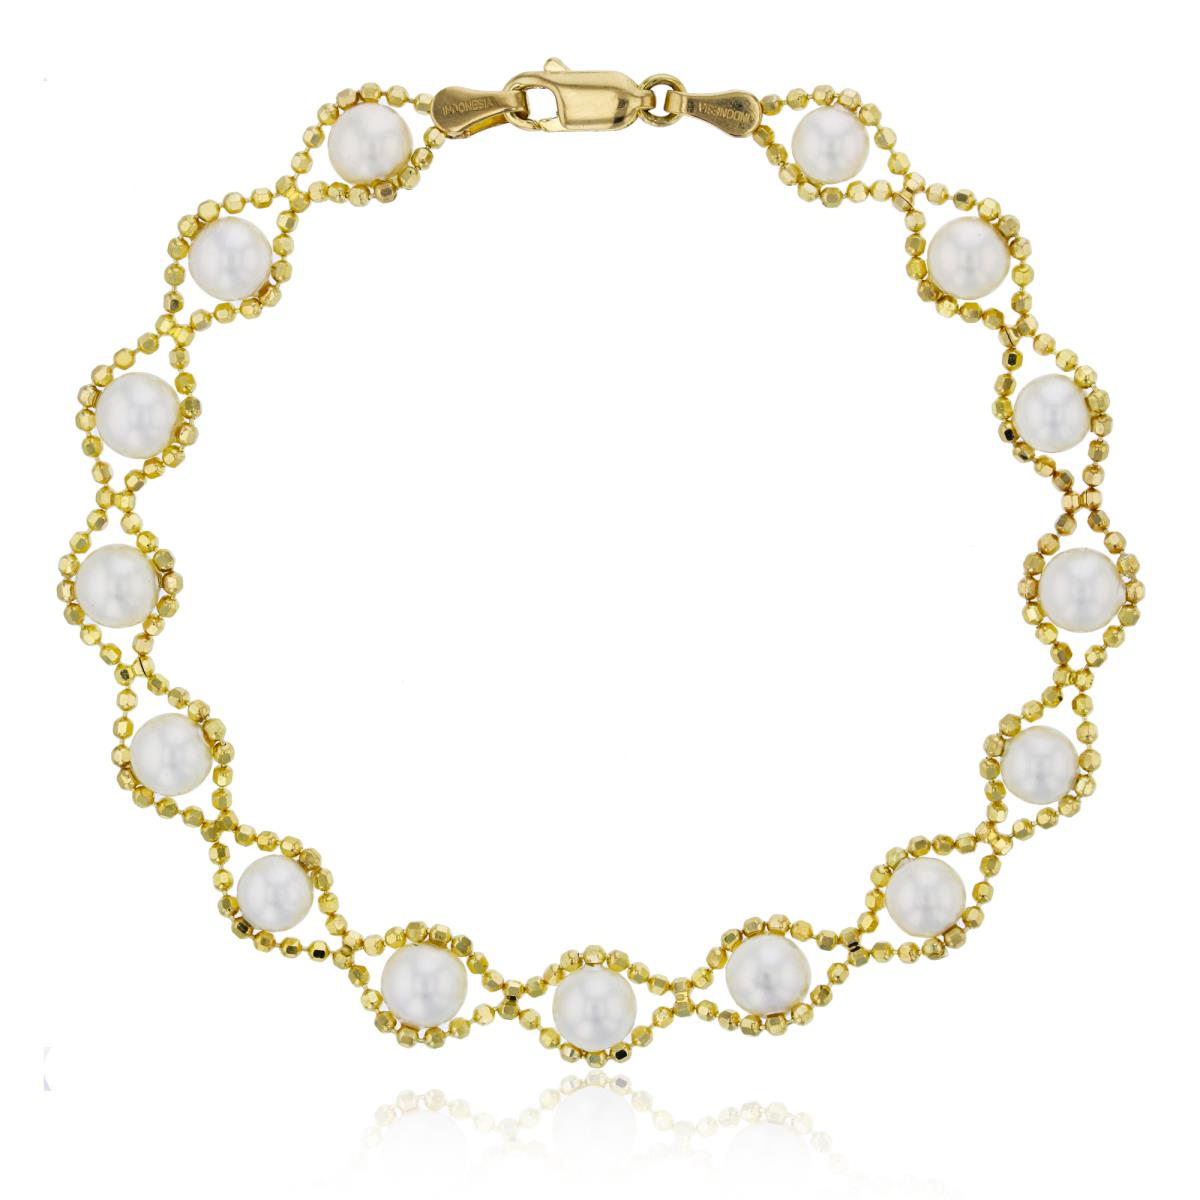 14K Yellow Gold 5mm White Pearl Chained Bracelet